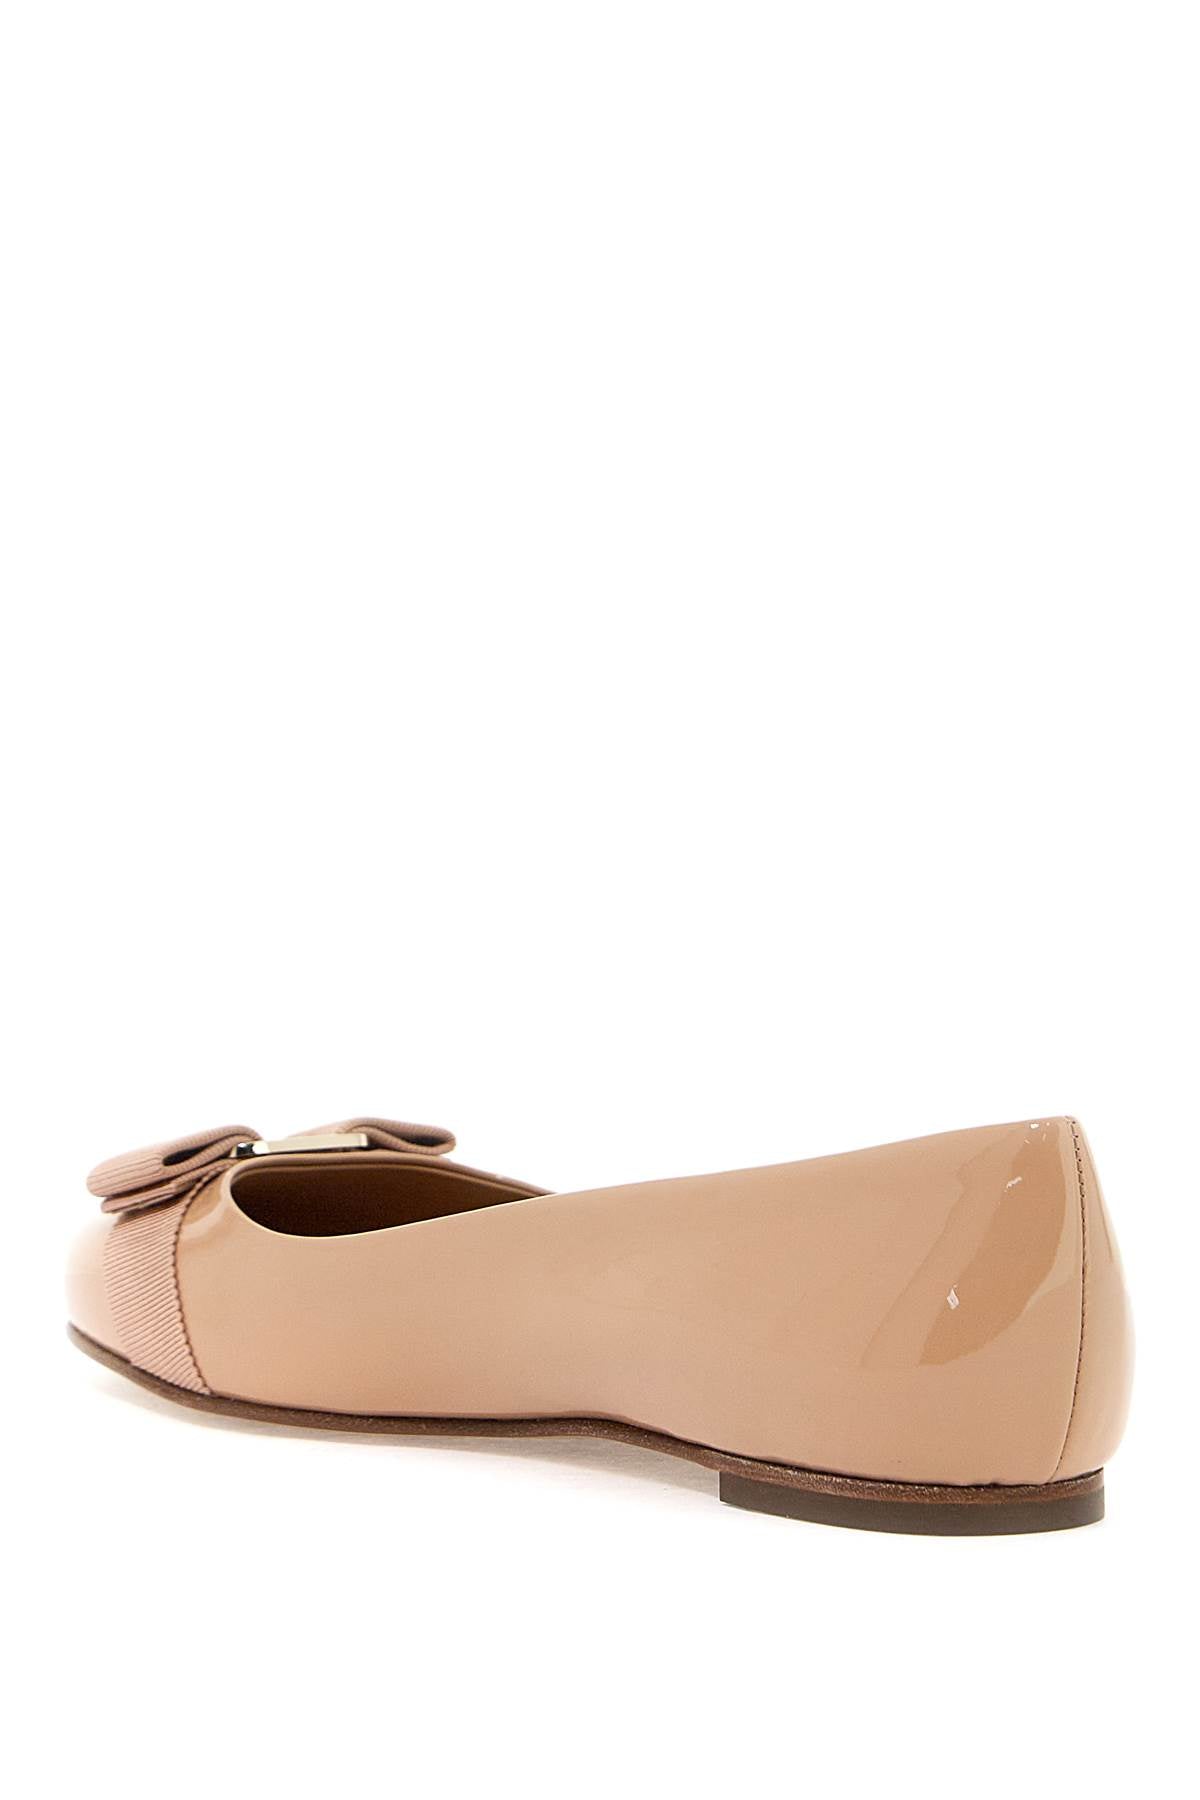 FERRAGAMO Tan Patent Leather Ballet Flats with Vara Bow for Women